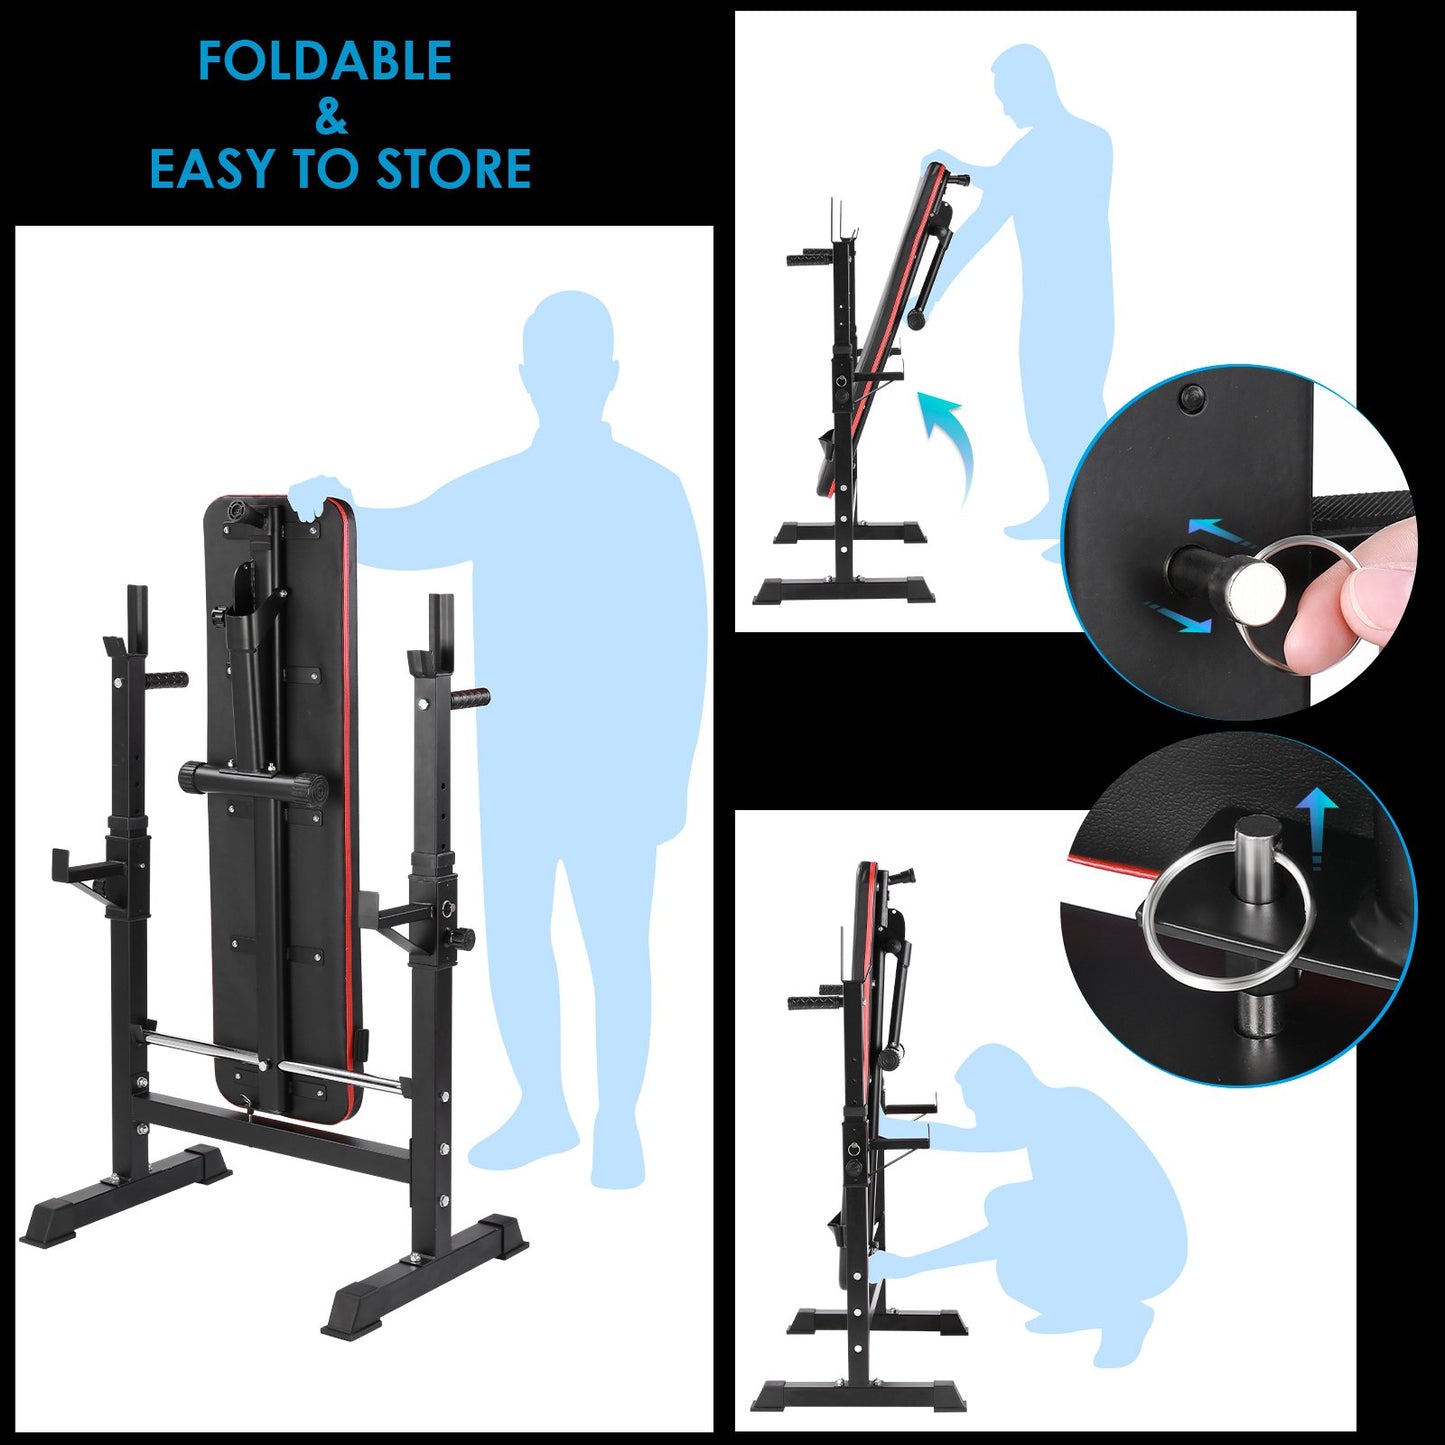 Multifunction Weight Bench, Training Bench with Barbell Rack, Foldable, Flat Bench, Workout Bench and Squat Rack Up To 200 Kg - adamshealthstore